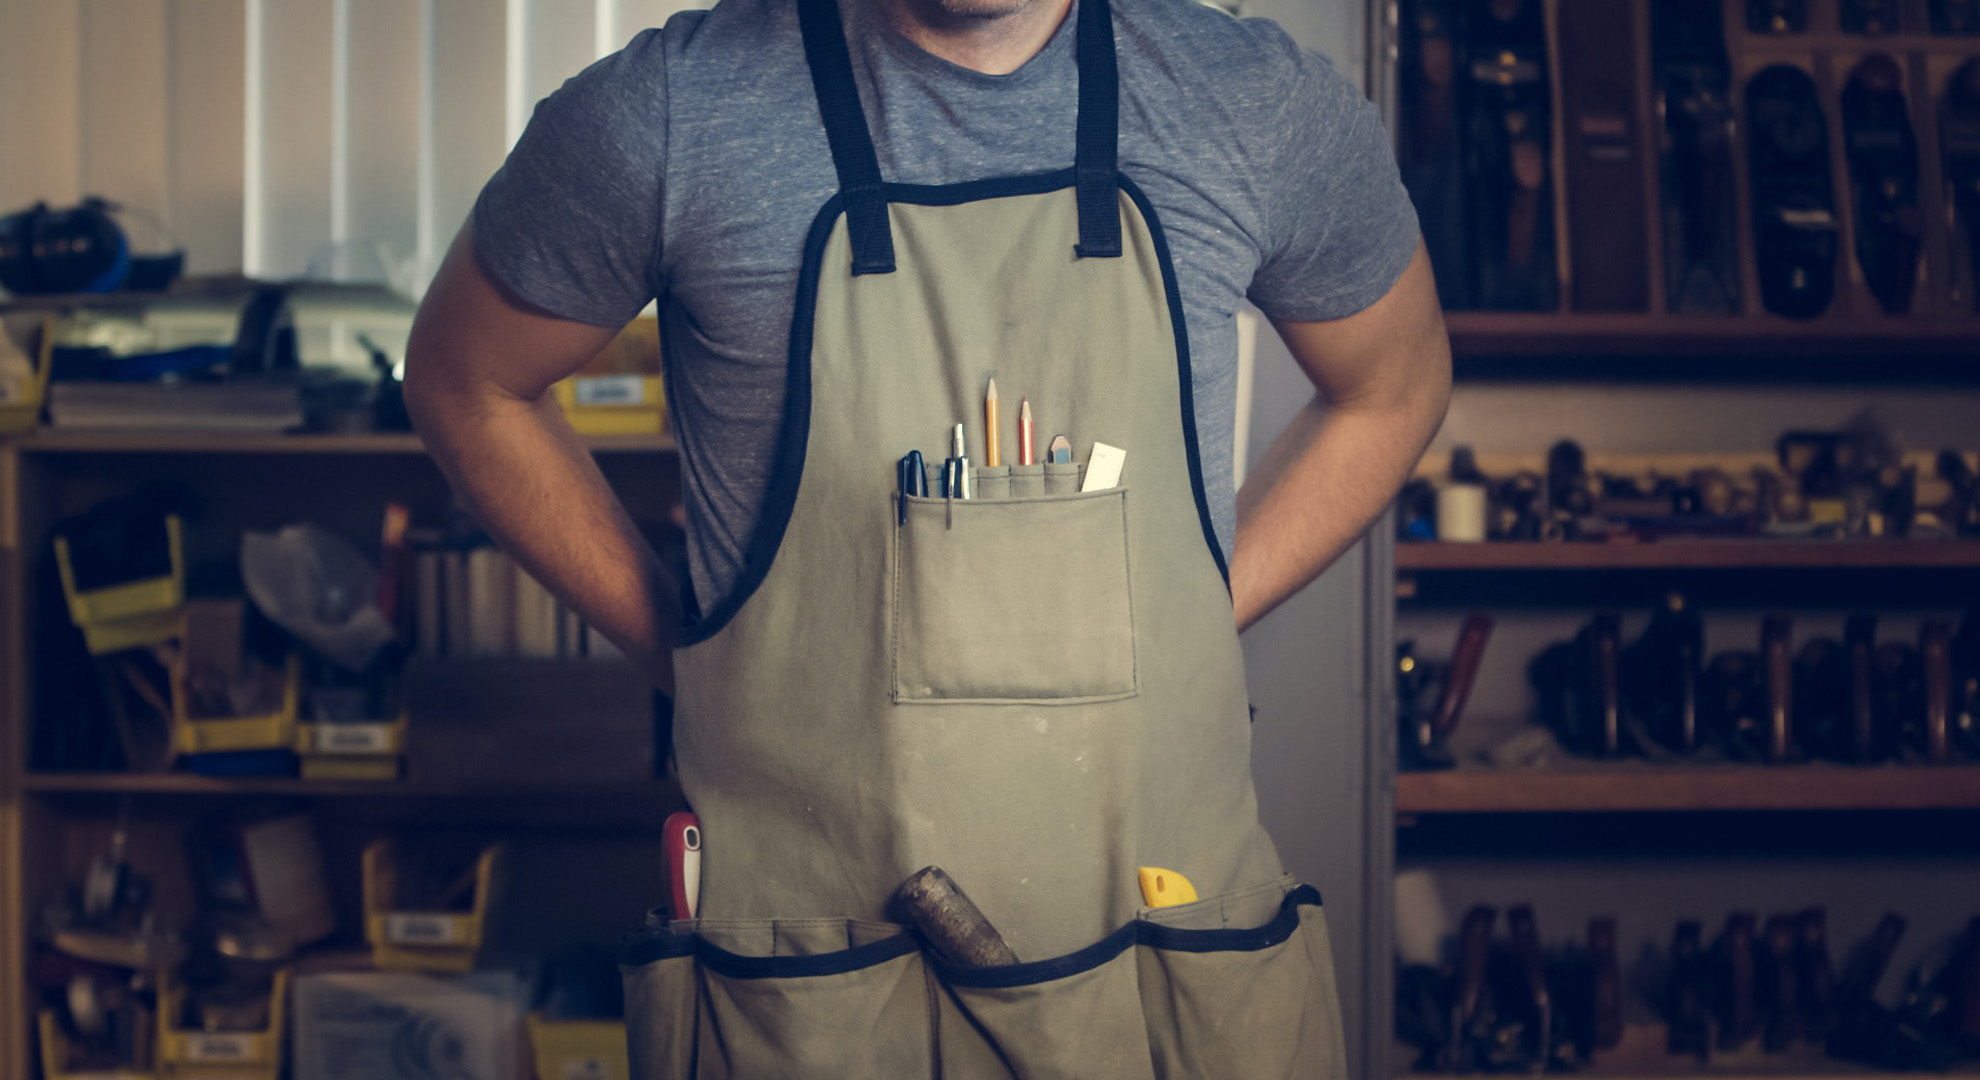 Handyman with apron filled with tools